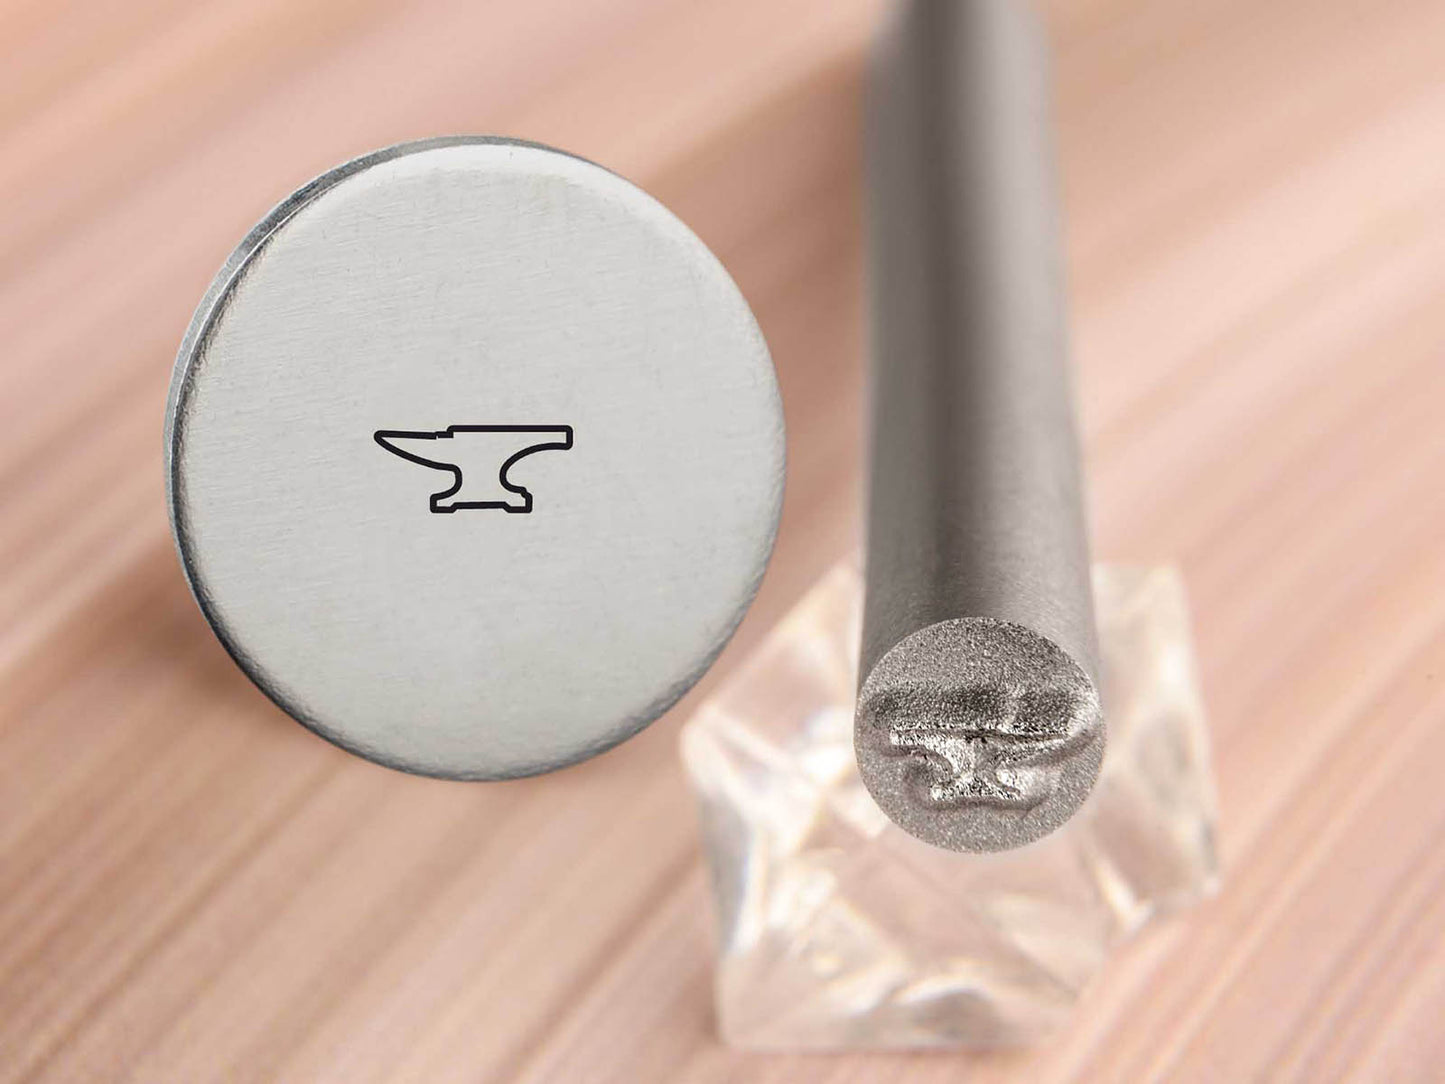 Straight Metal Stamping Tool for Jewelry & Stainless Steel. With our metal stamp, you'll get the best stamping results on stainless steel, precious metals, wood, leather, and plastic. The sharp edges of the decorative die make stamping easier, and the result better. 